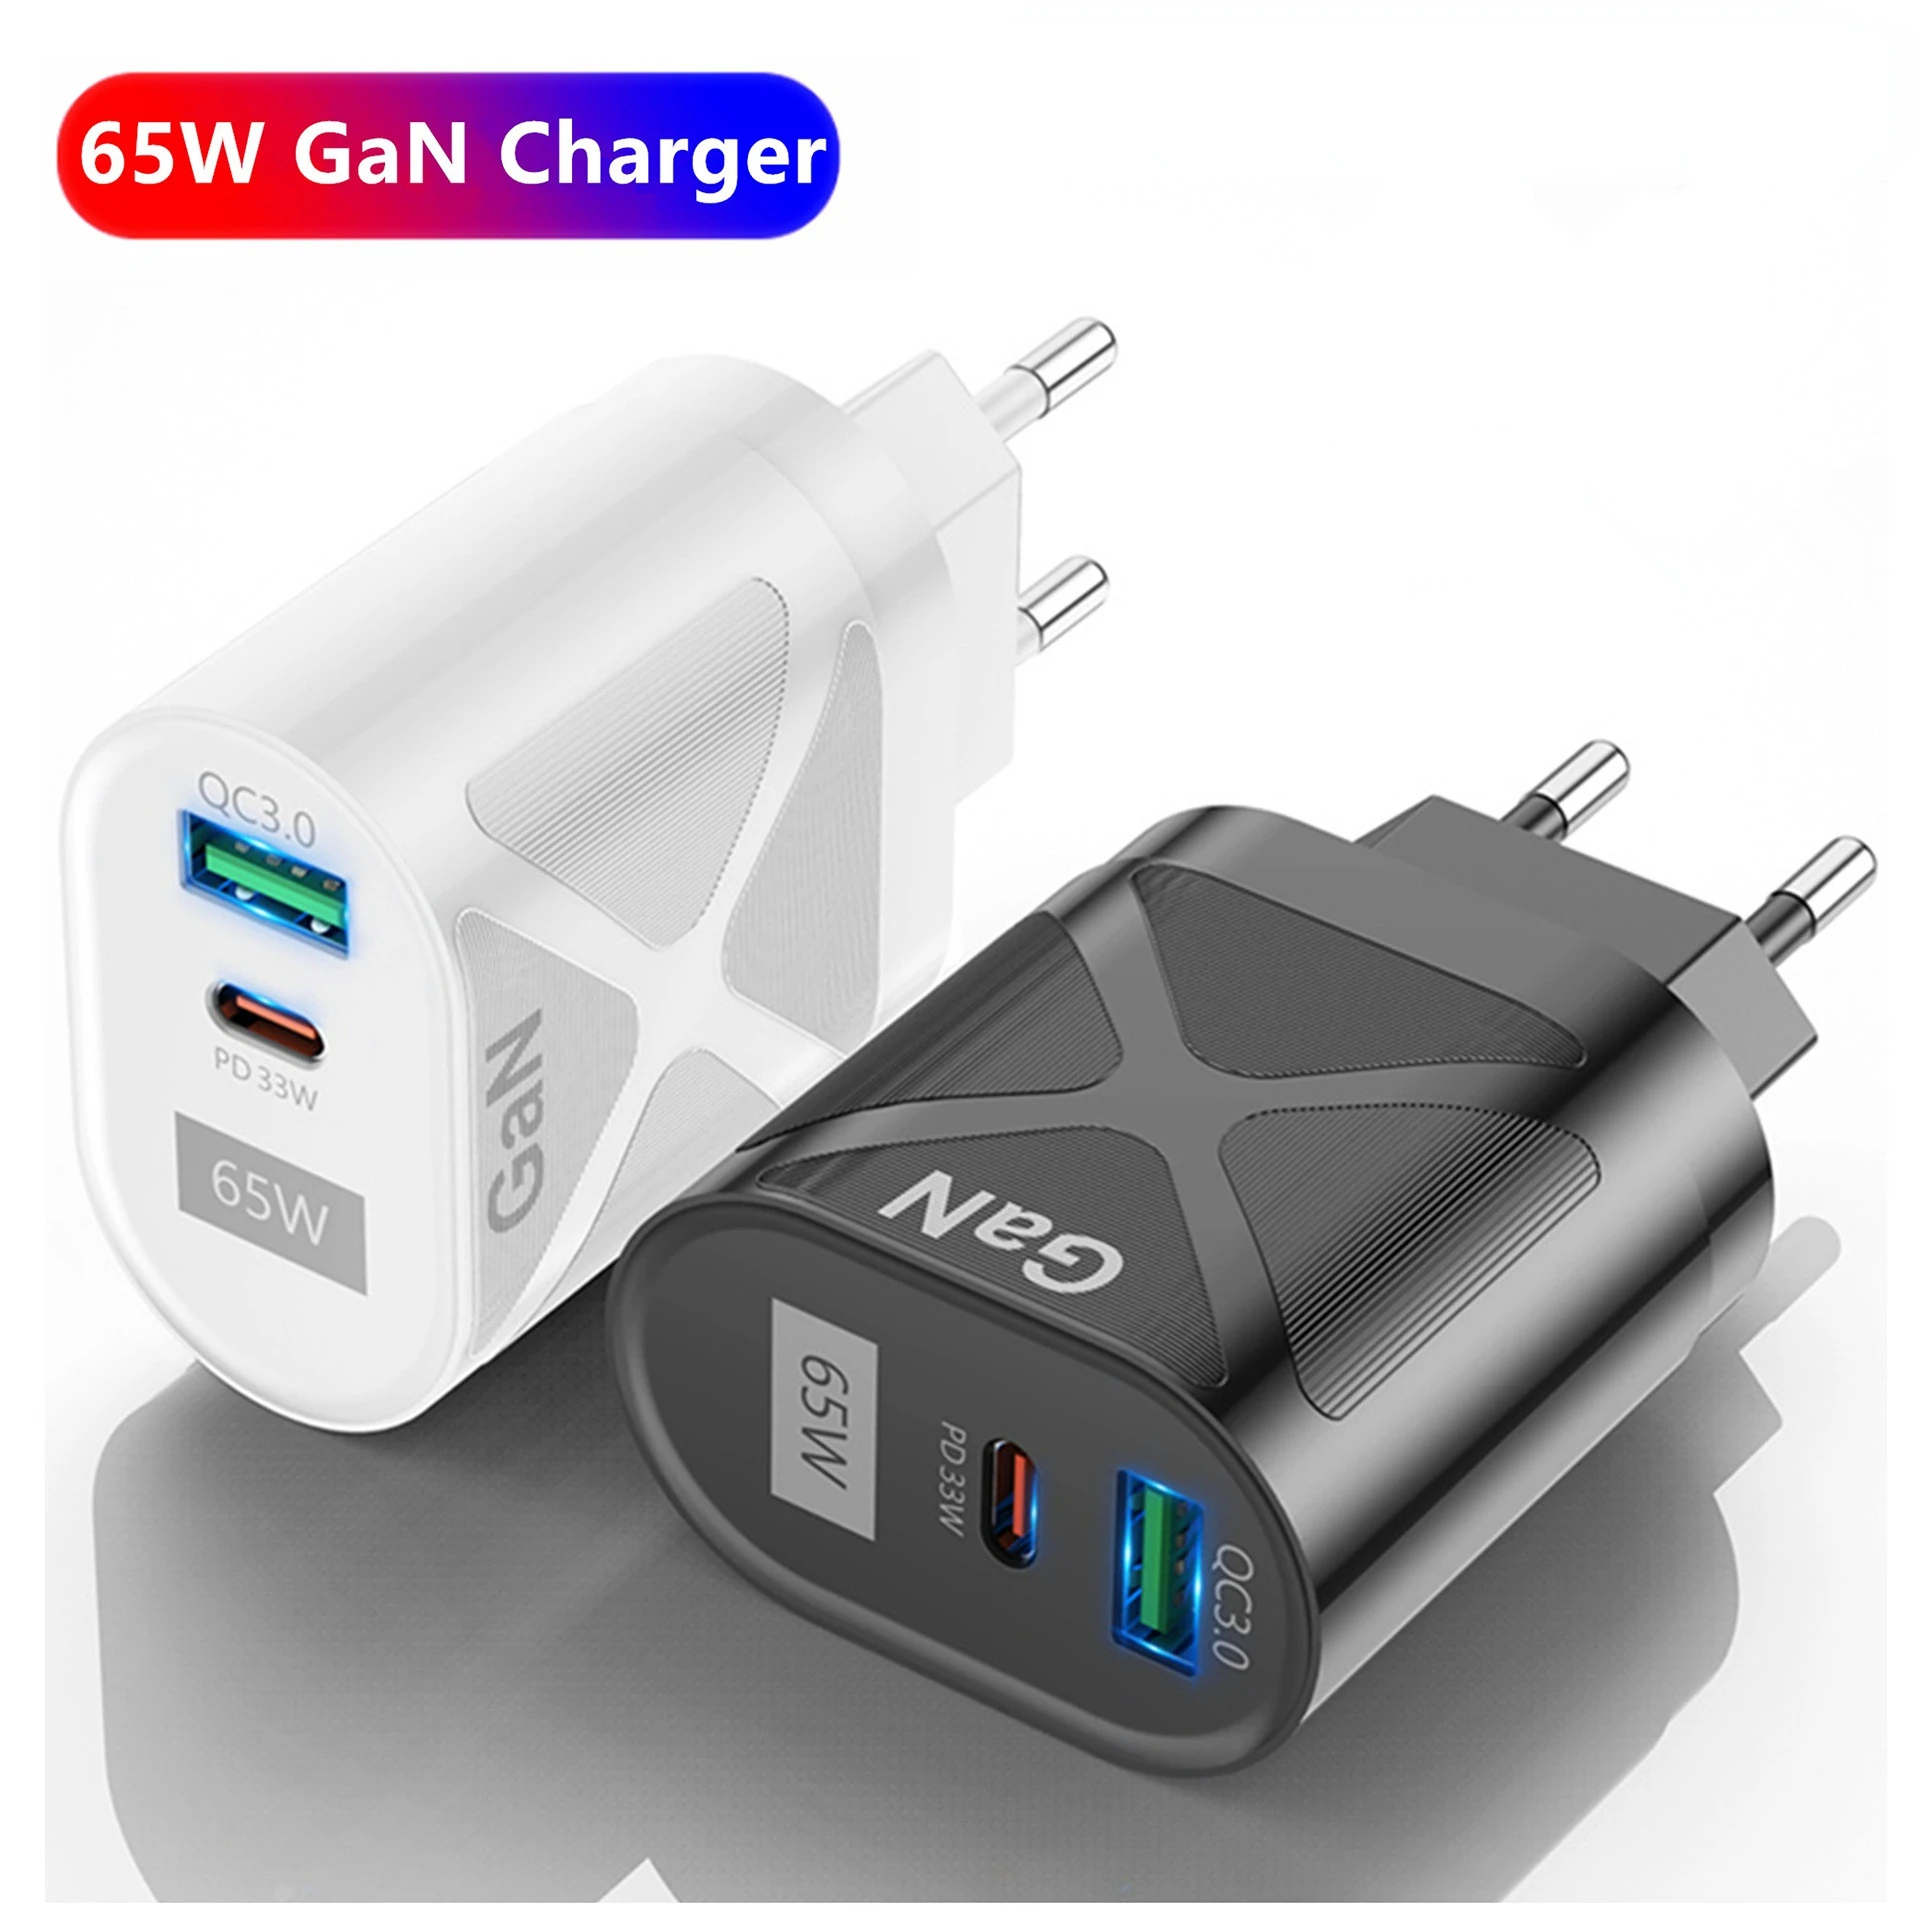 

PD 65W Charger USB 3.1 Type C Charger for Apple MacBook Air IPad Pro Samsung Tablet Phone EU/US Fast Charger for Nintendo Switch